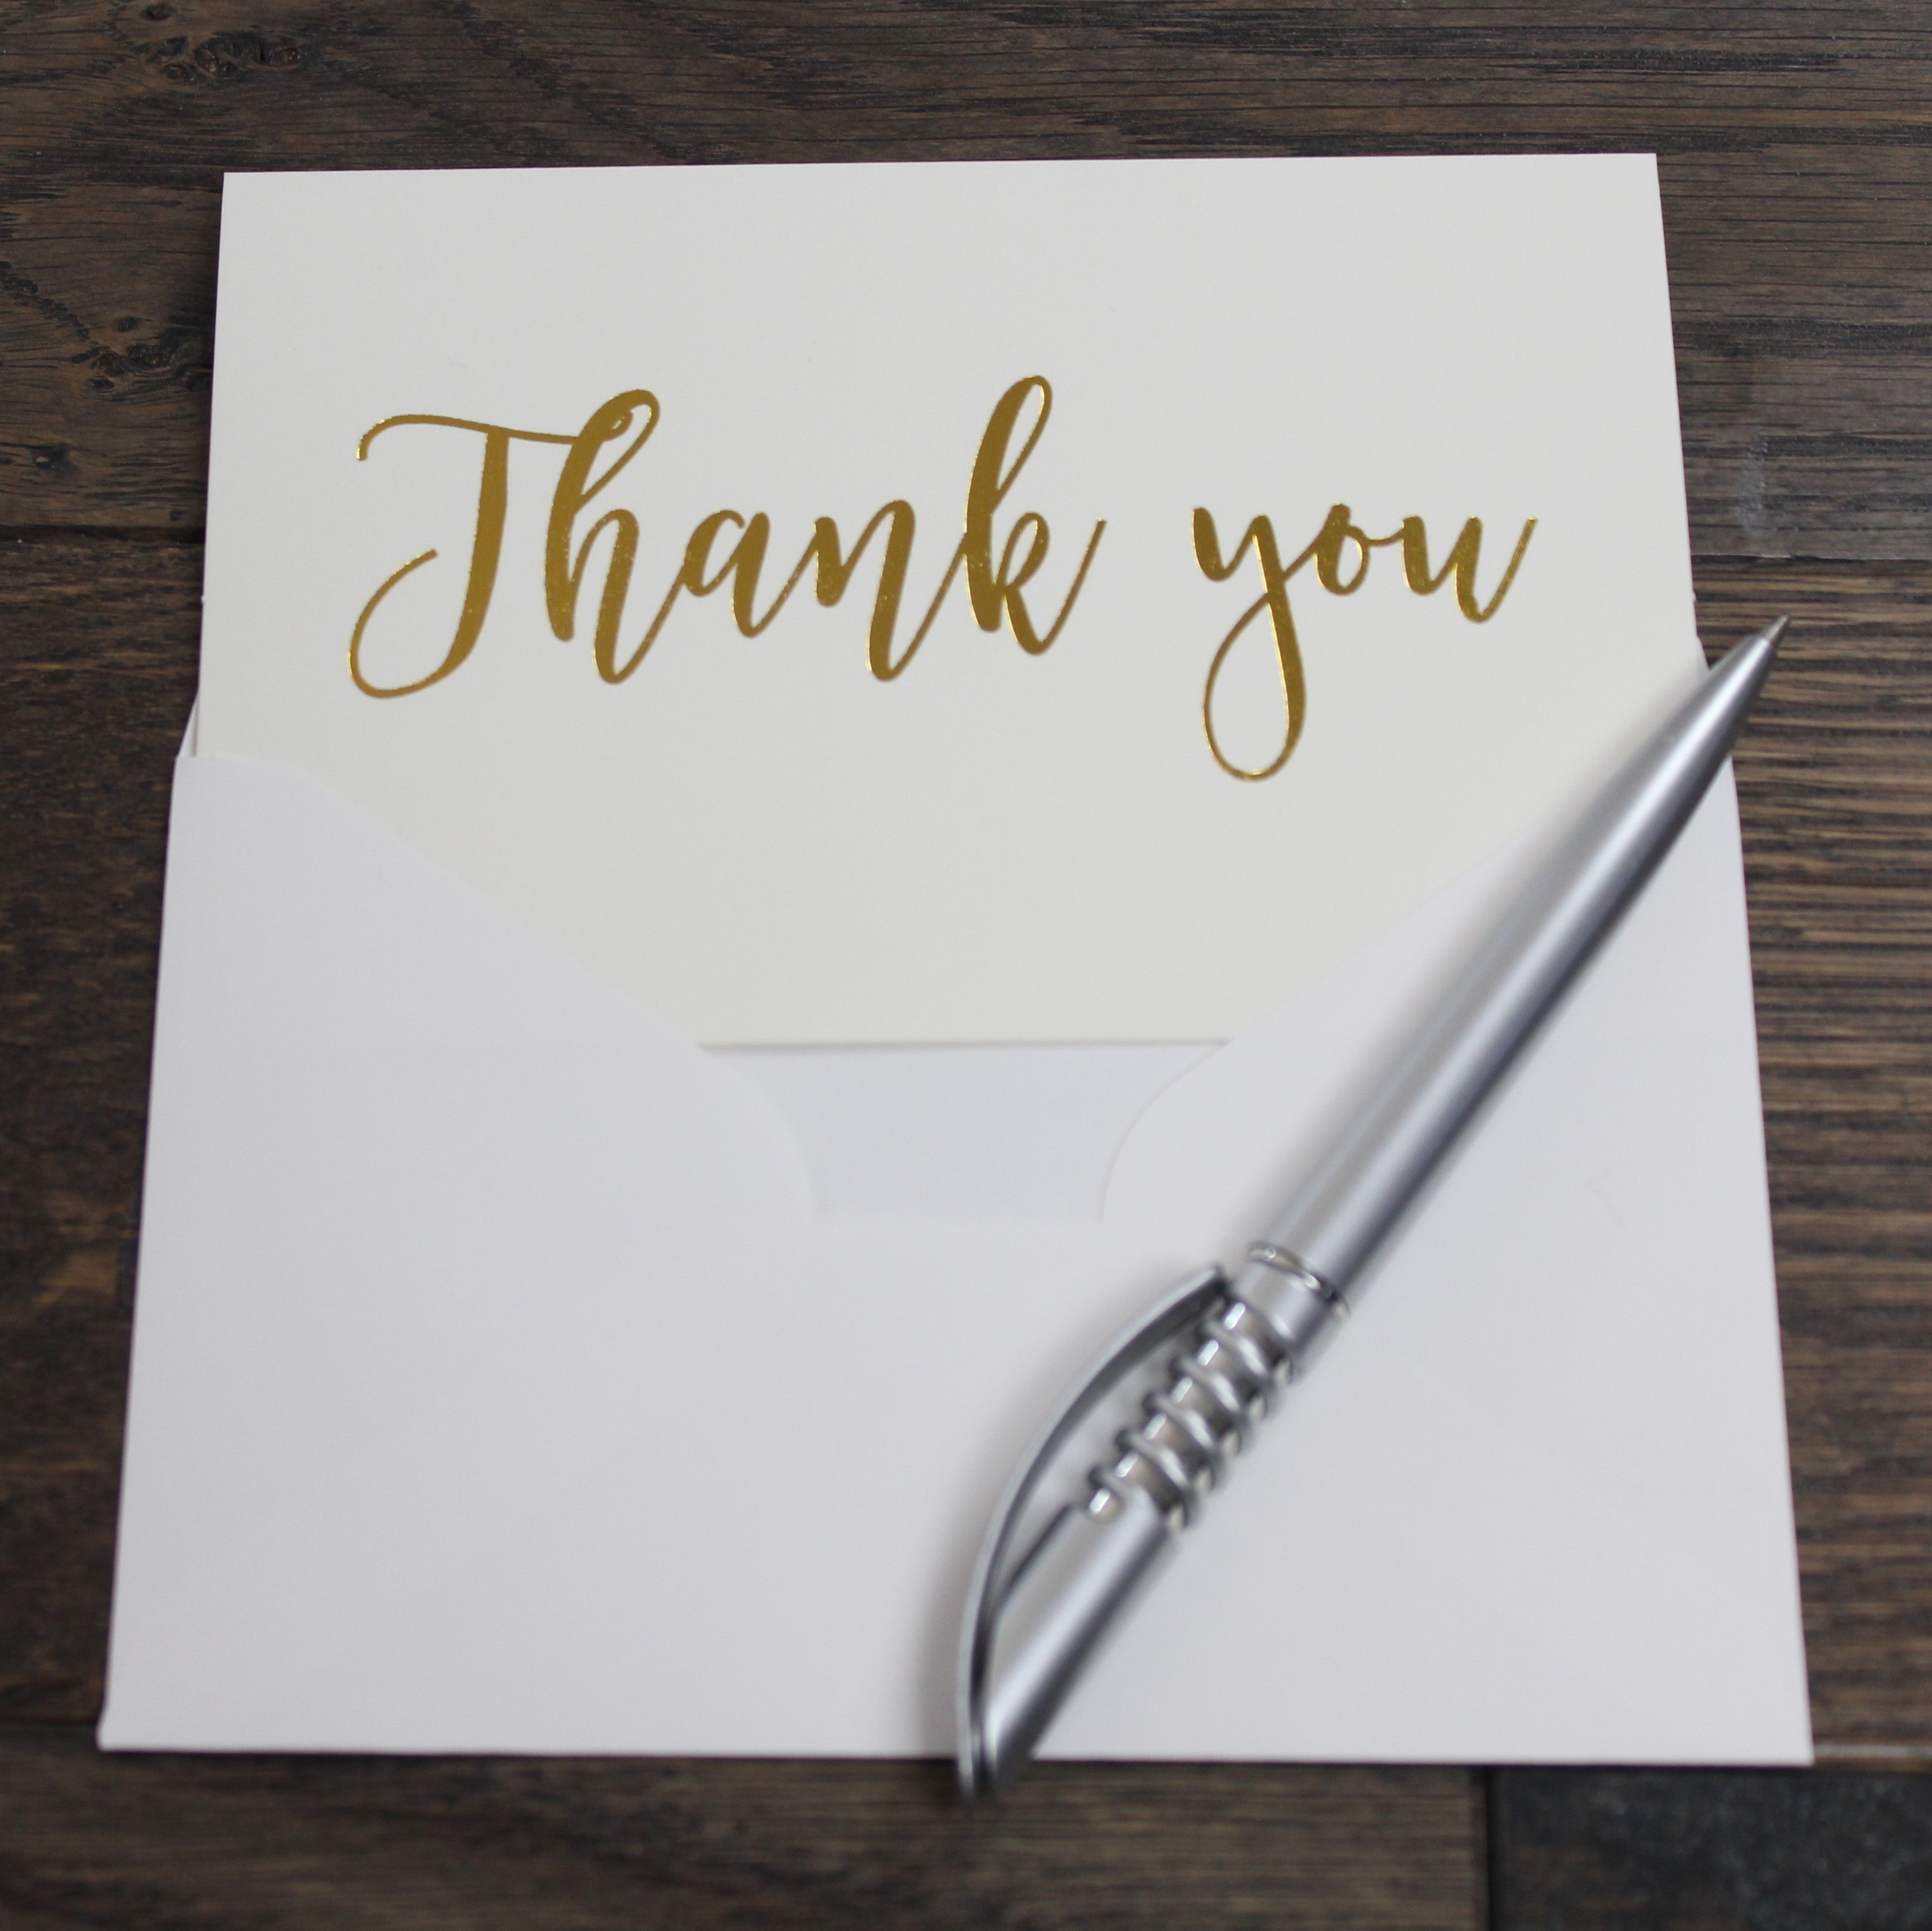 100 Thank You Cards in White with Envelopes & Stickers - Elegant 4 Designs  Bulk Notes Embossed with Silver Foil Letters for Wedding, Formal, Business